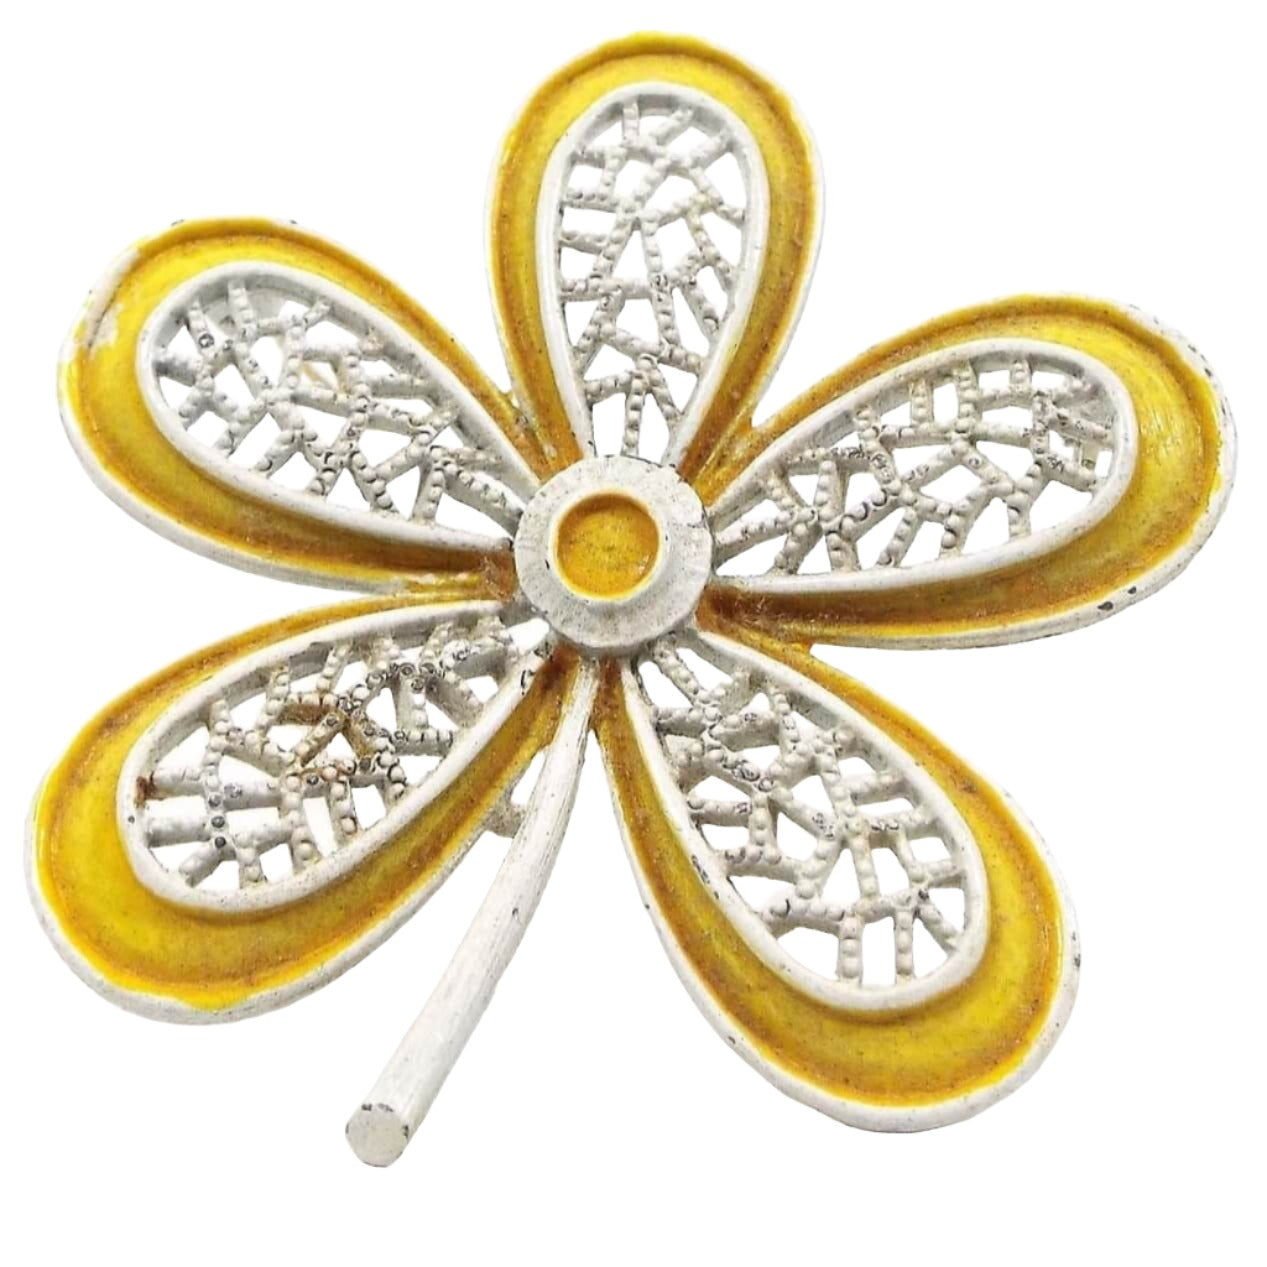 Front view of the 1960's Mid Century vintage Hippie flower brooch pin. It is shaped like a large flower with long rounded petals. The petals have a filigree design. It is white enameled with a yellow enamel edge and center. 